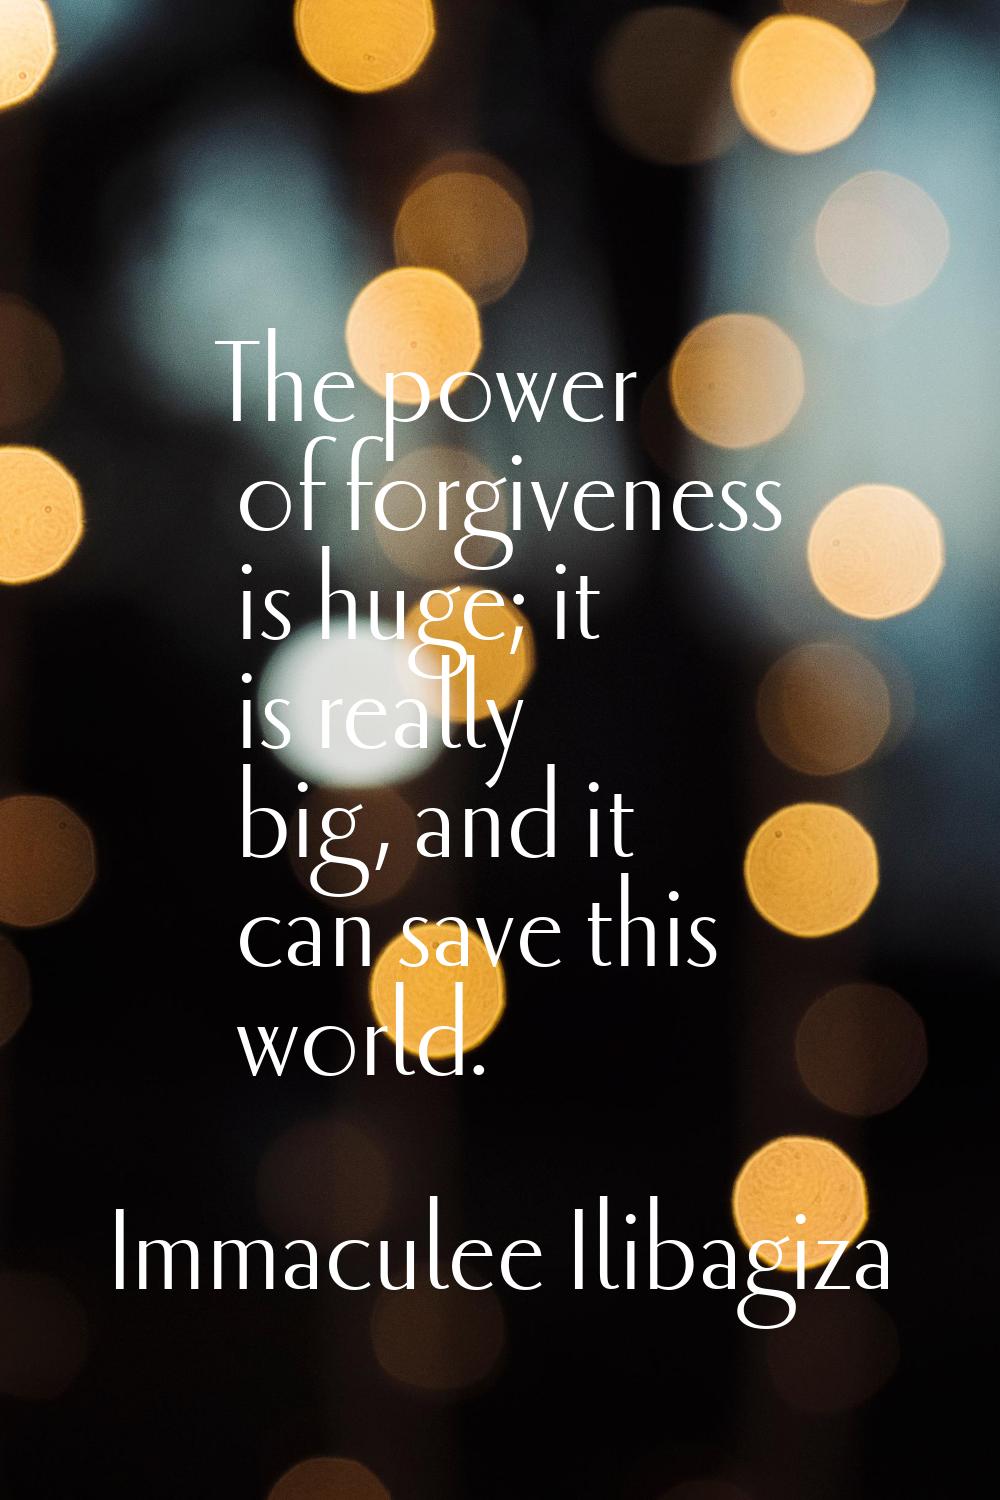 The power of forgiveness is huge; it is really big, and it can save this world.